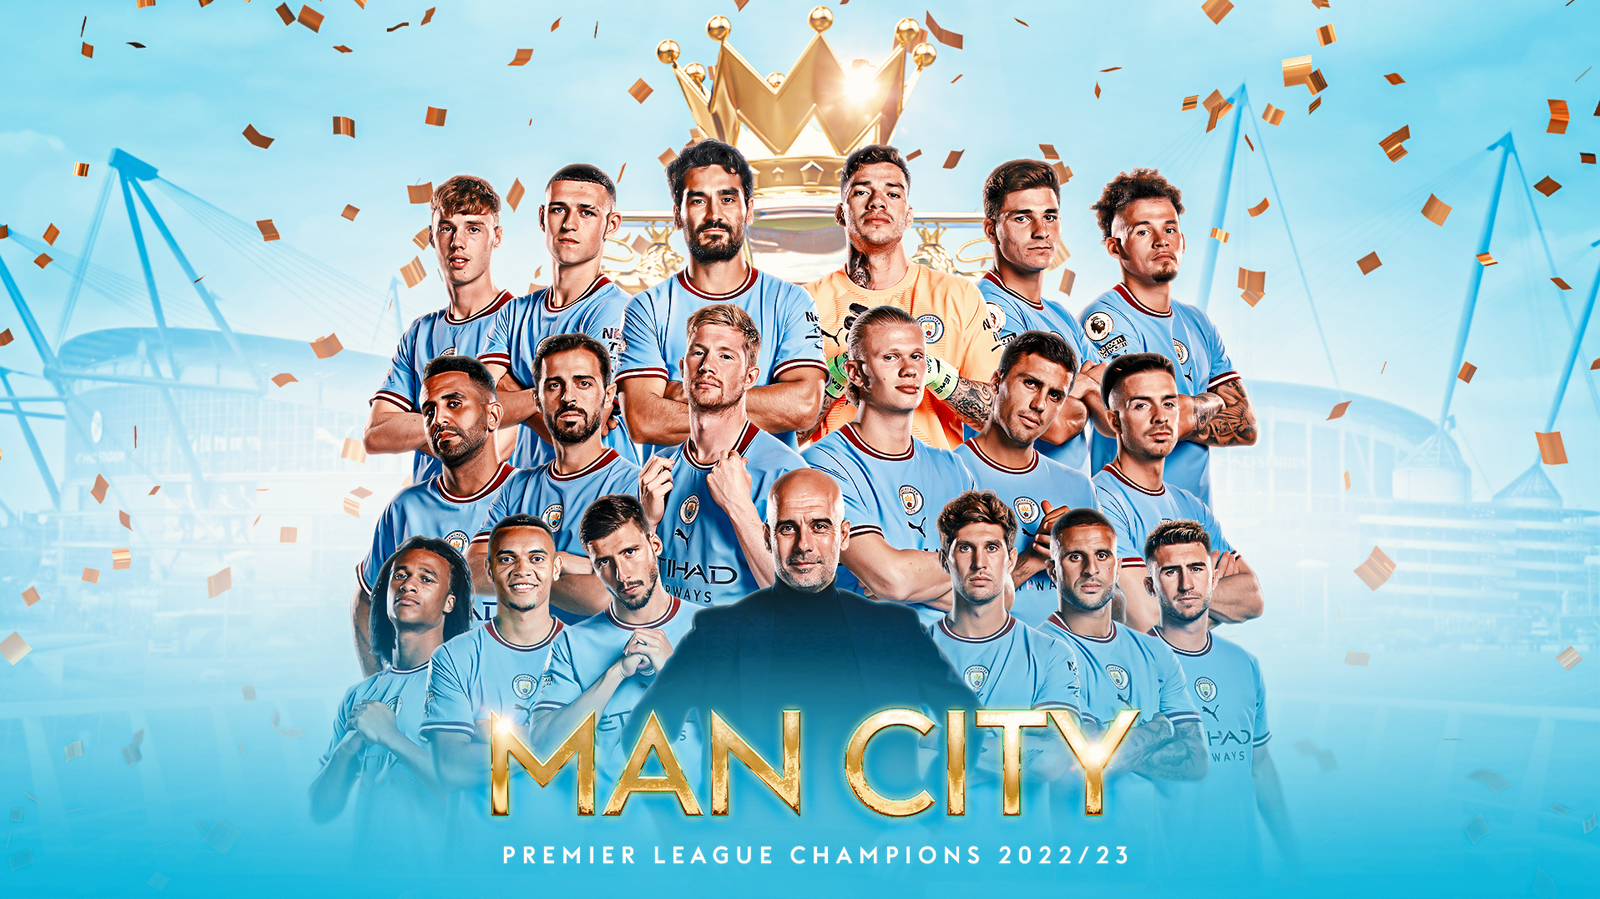 Manchester City win Premier League title for fifth time in six